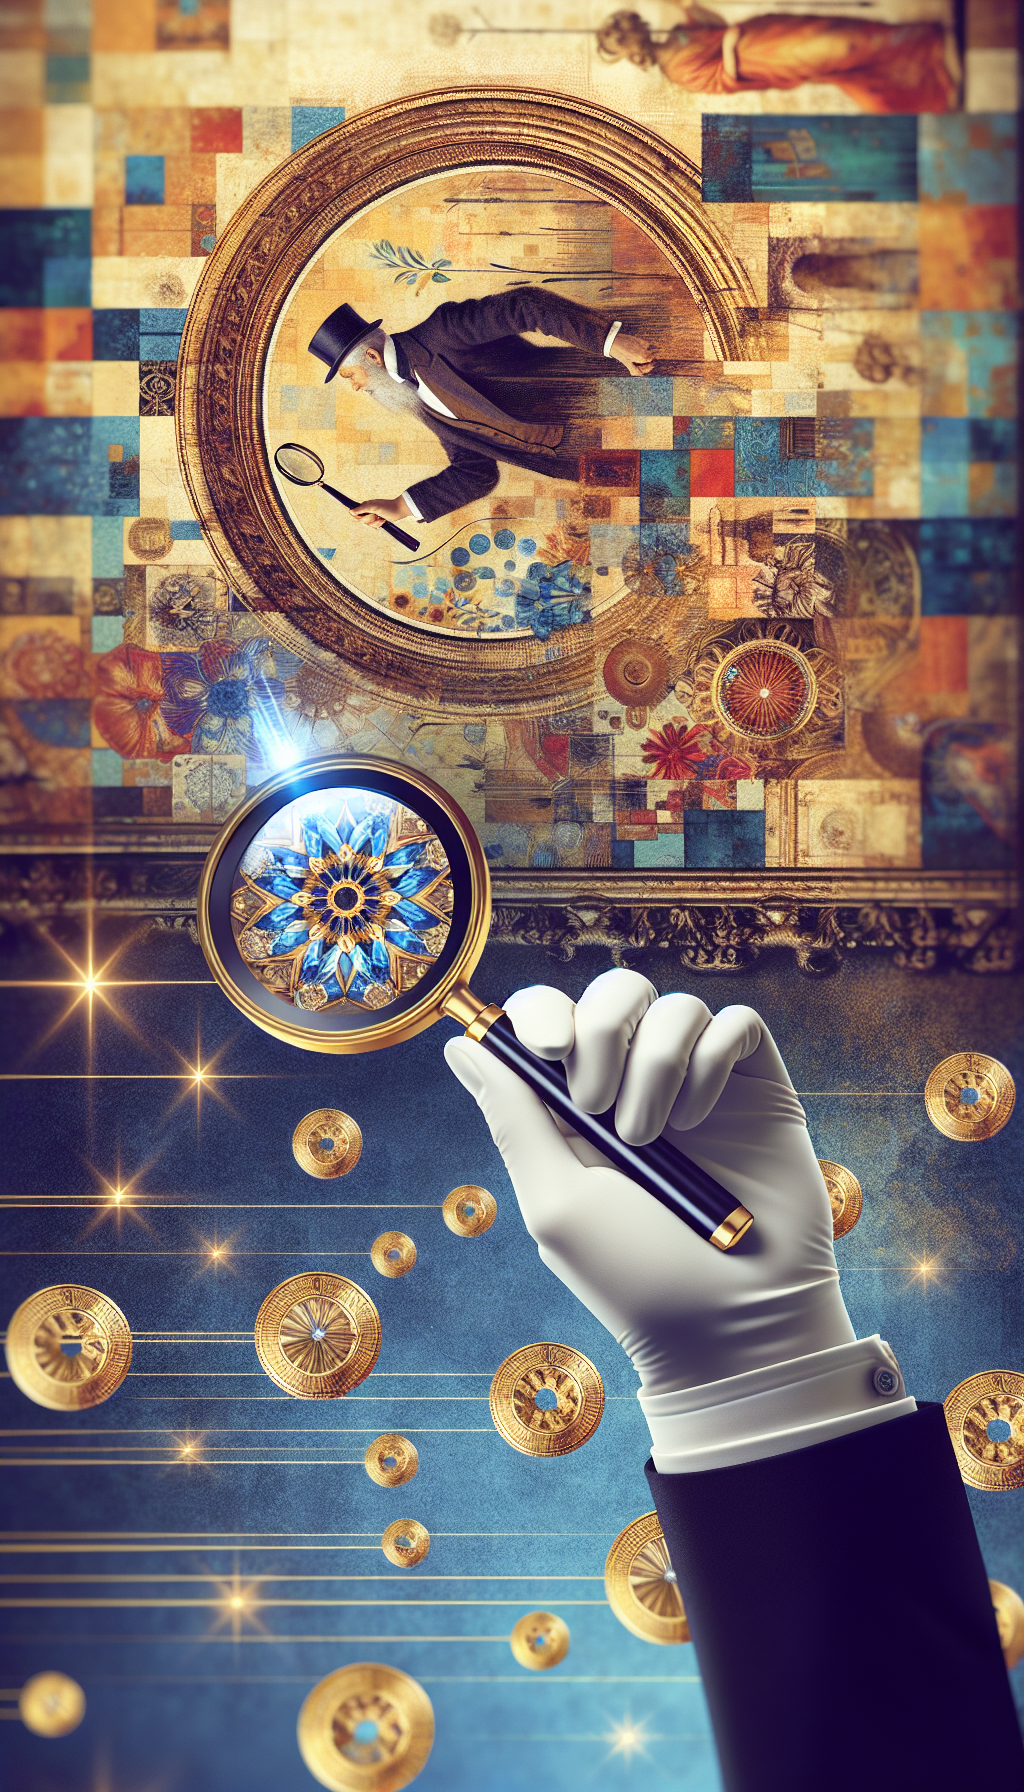 An elegant hand with a jeweler's loupe magnifies a section of an intricate painting, revealing layers of historical events within its brushstrokes. The artwork morphs into shimmering gold coins at the edges, symbolizing its appraised prestige and worth. Styles range from photorealistic details on the painting to abstract, cubist representations of the coins, reflecting the complexity of art valuation.